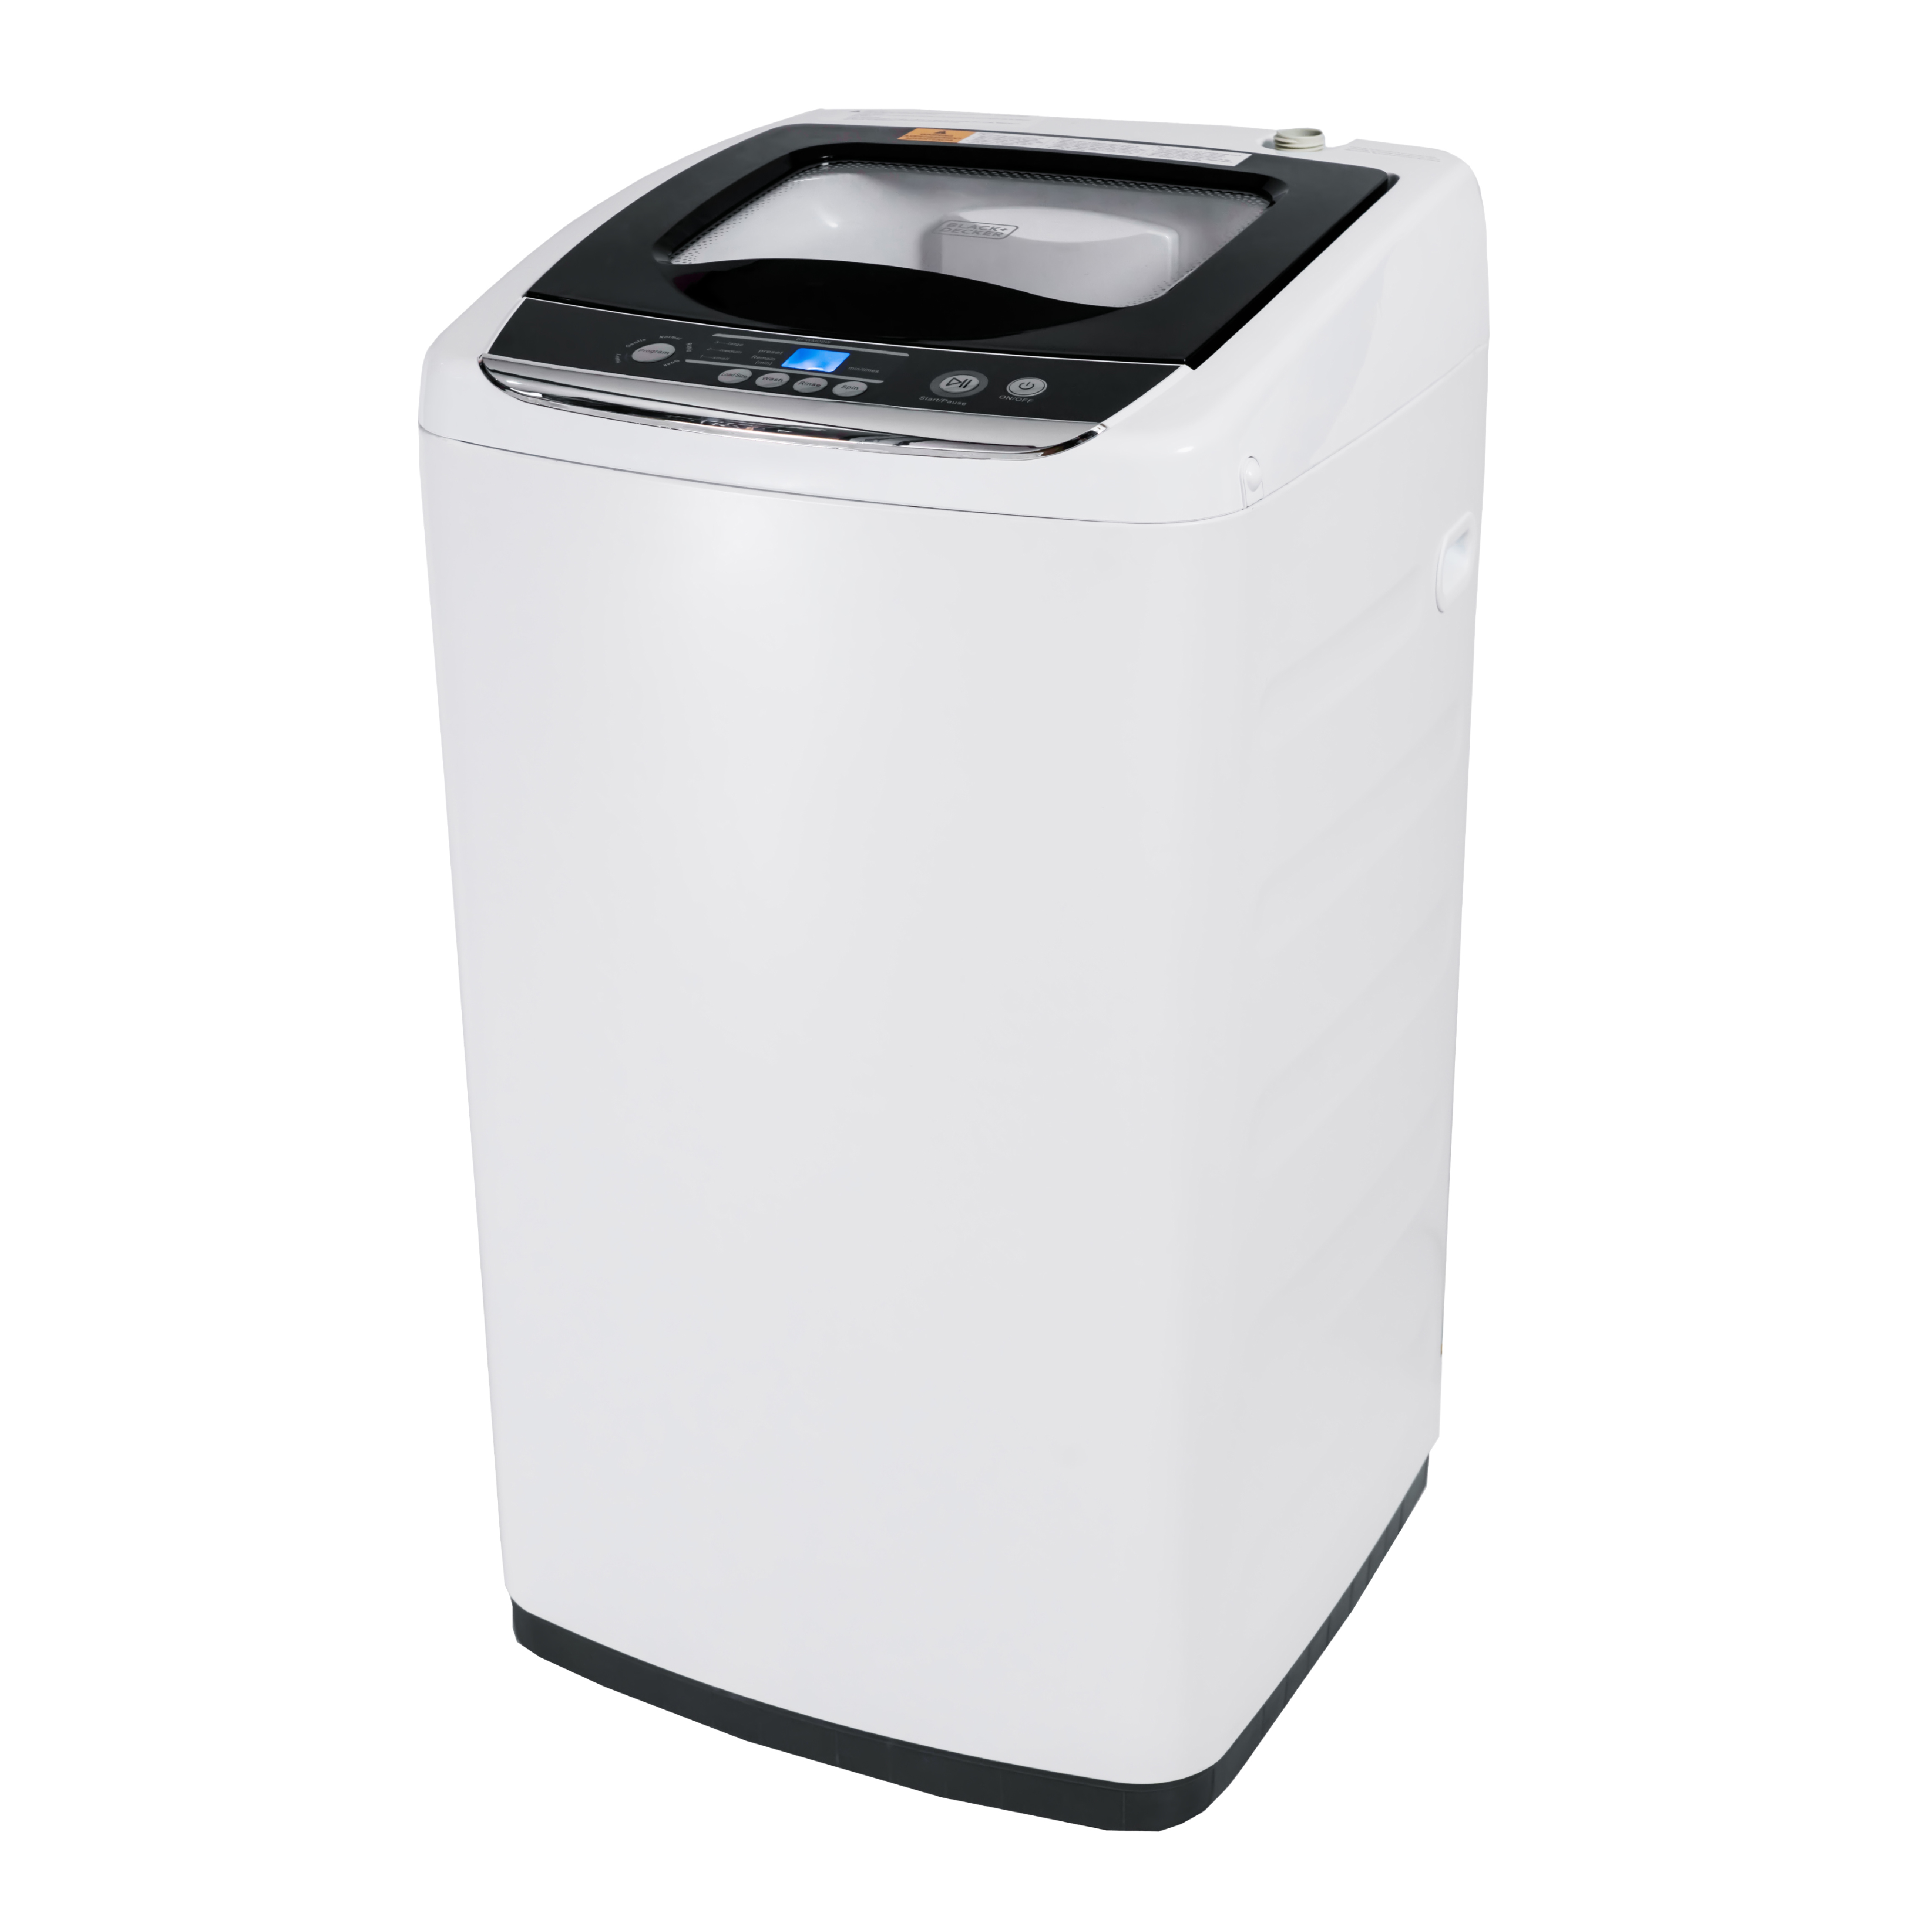 Black+Decker BPWM09W Washer - 5 Mode(s) - Top Loading - 0.90 ft³ Washer Capacity - Cold Water Supply - image 1 of 7